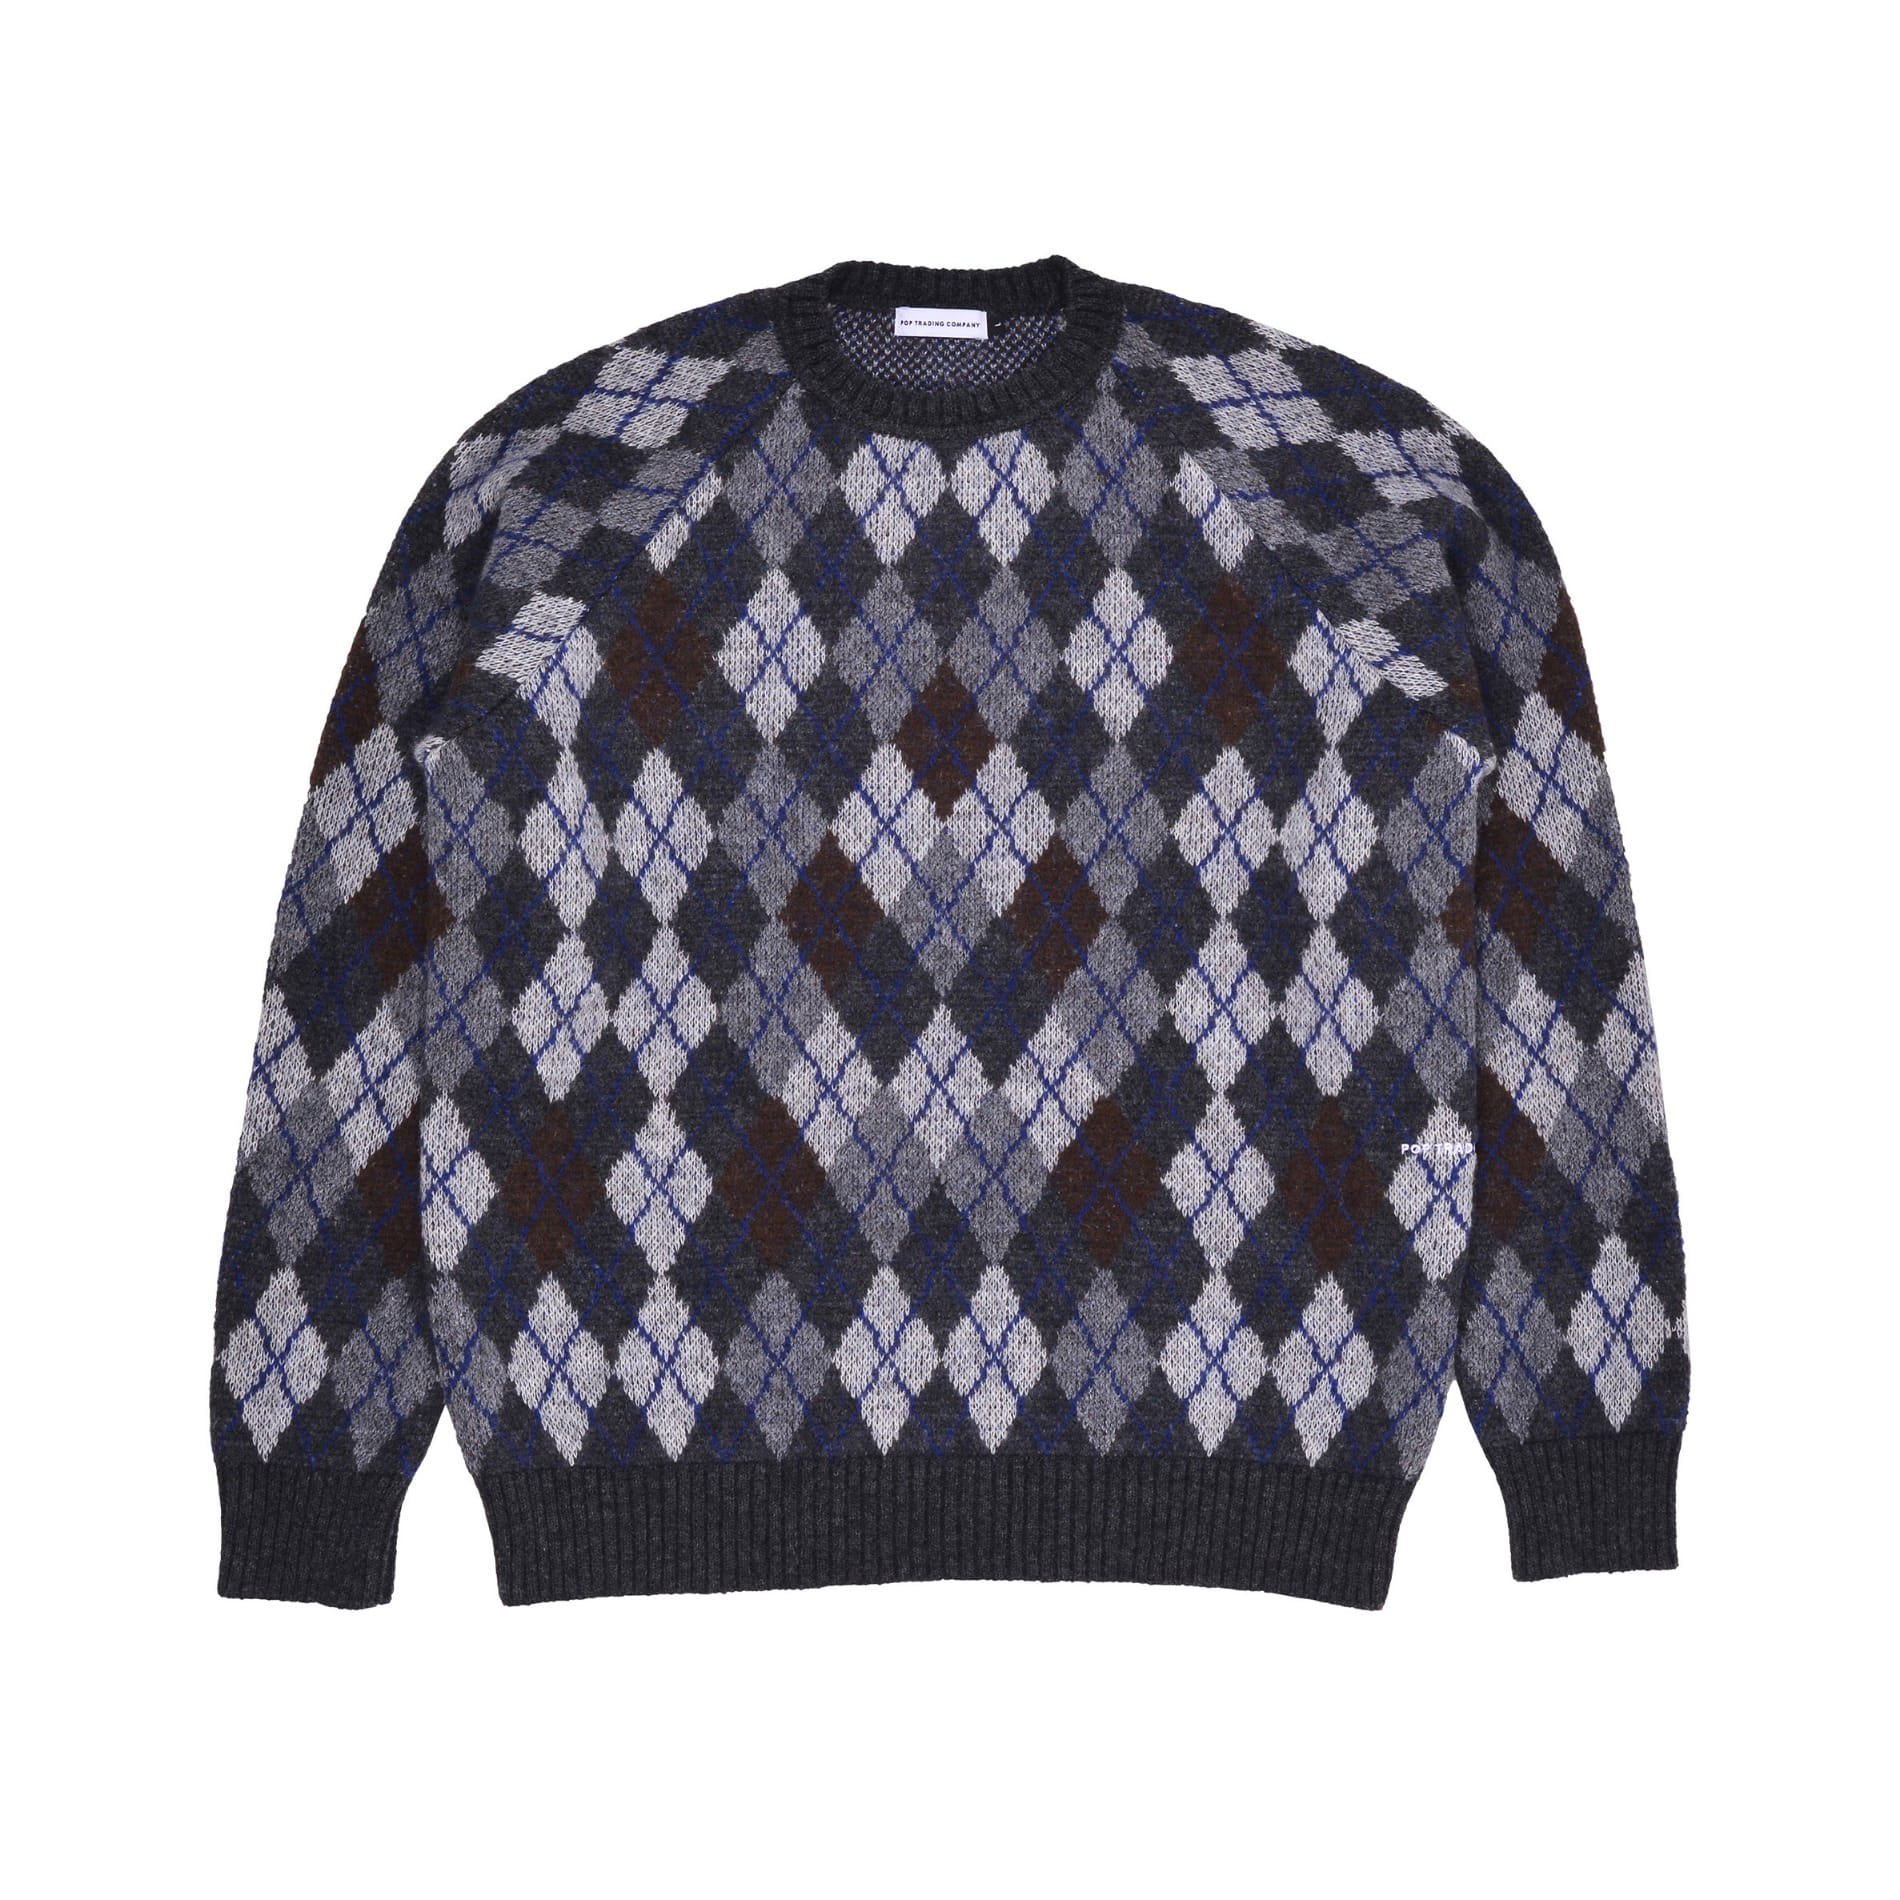 AW22 POP TRADING COMPANY BURLINGTON KNITTED CREWNECK ANTHRACITE